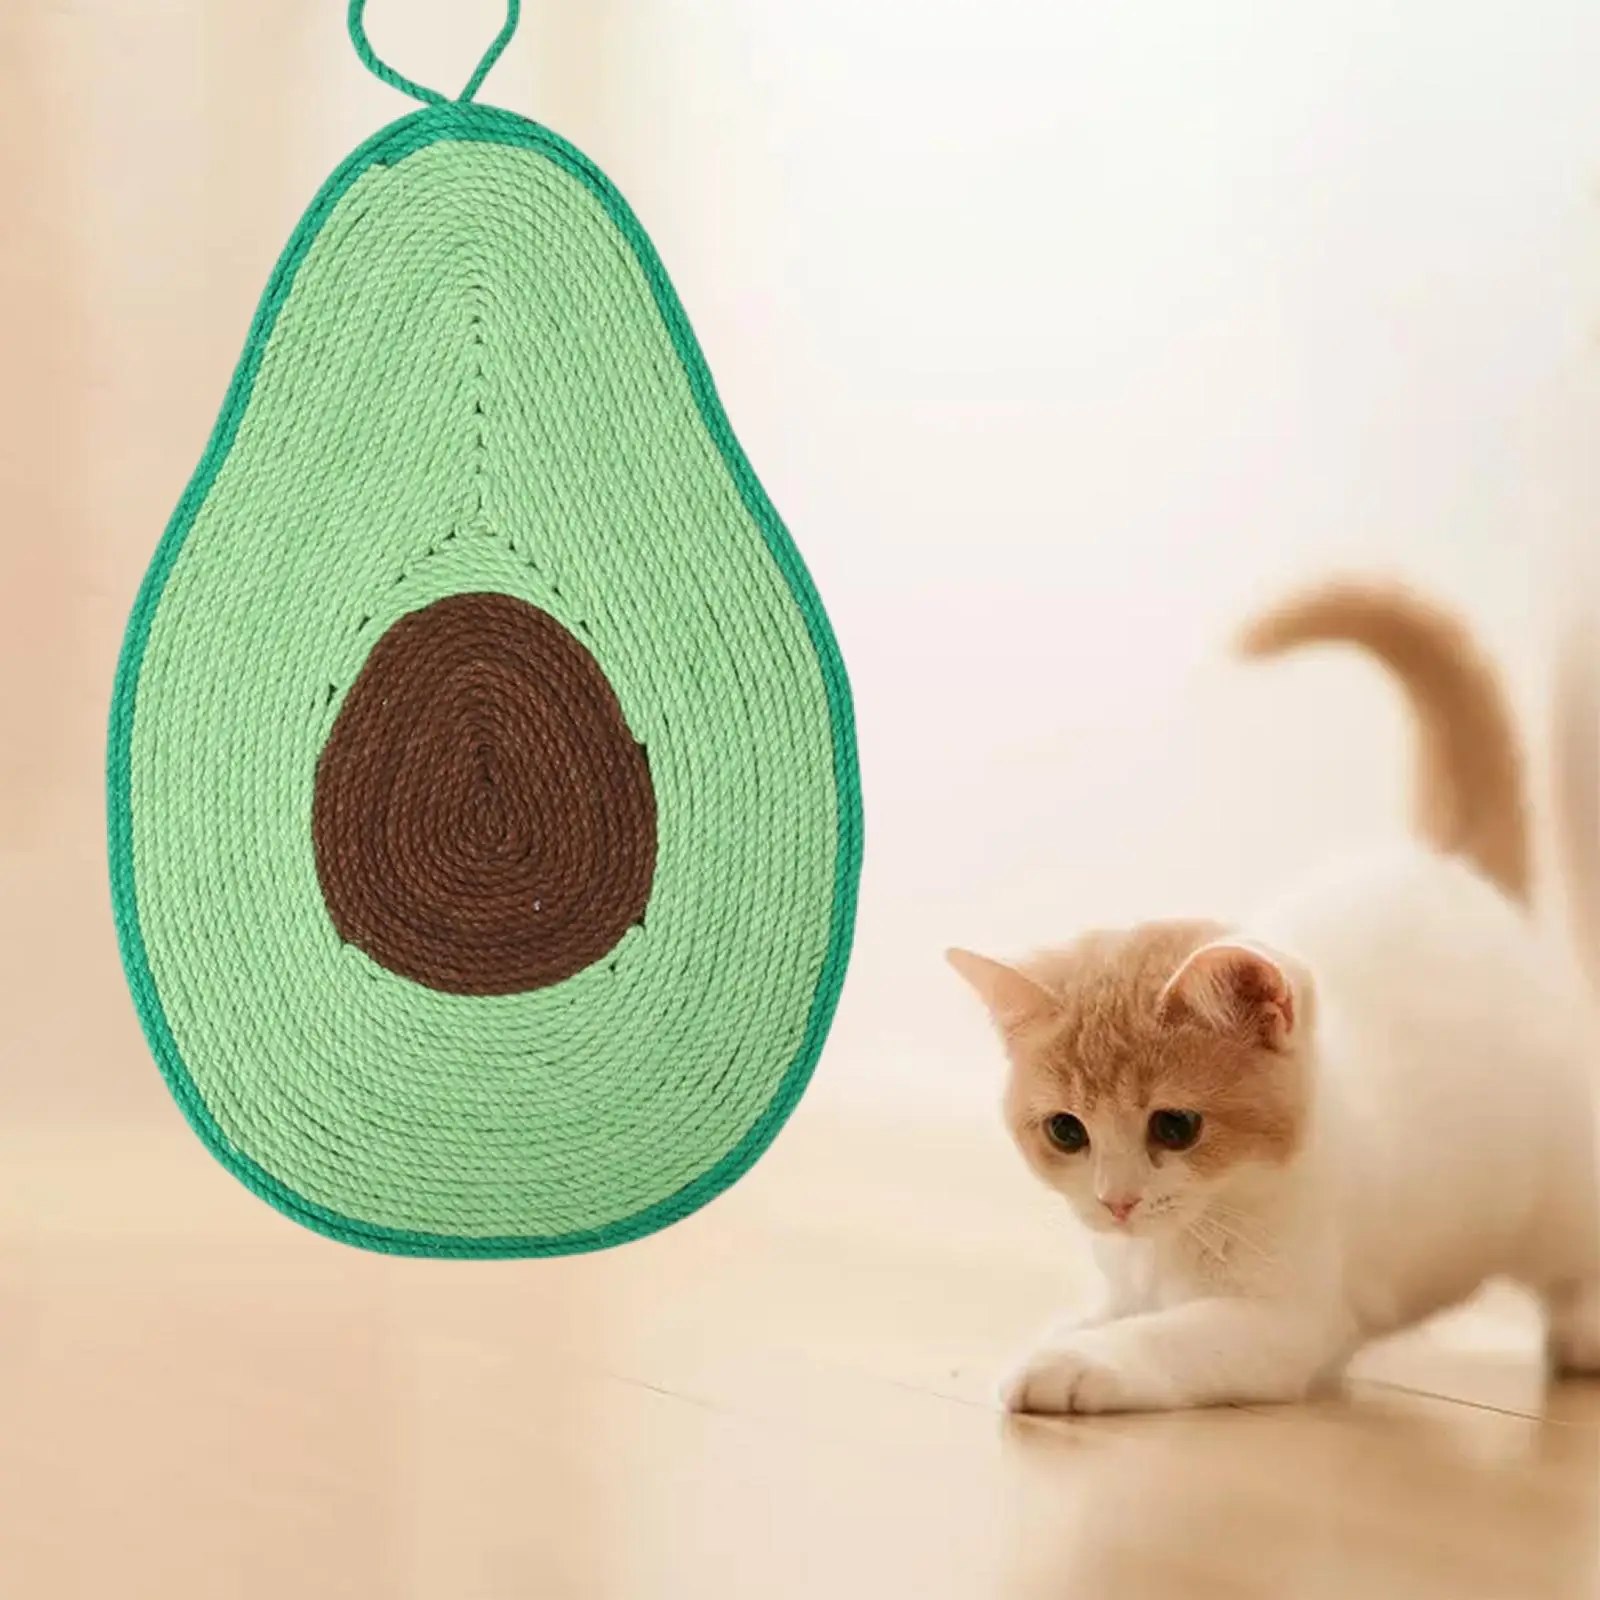 Natural Cat Scratching Board Board Wall Mounted Sisal Toy Furniture Protector Sofa Pet for Grinding Claws Pet Protect Furniture